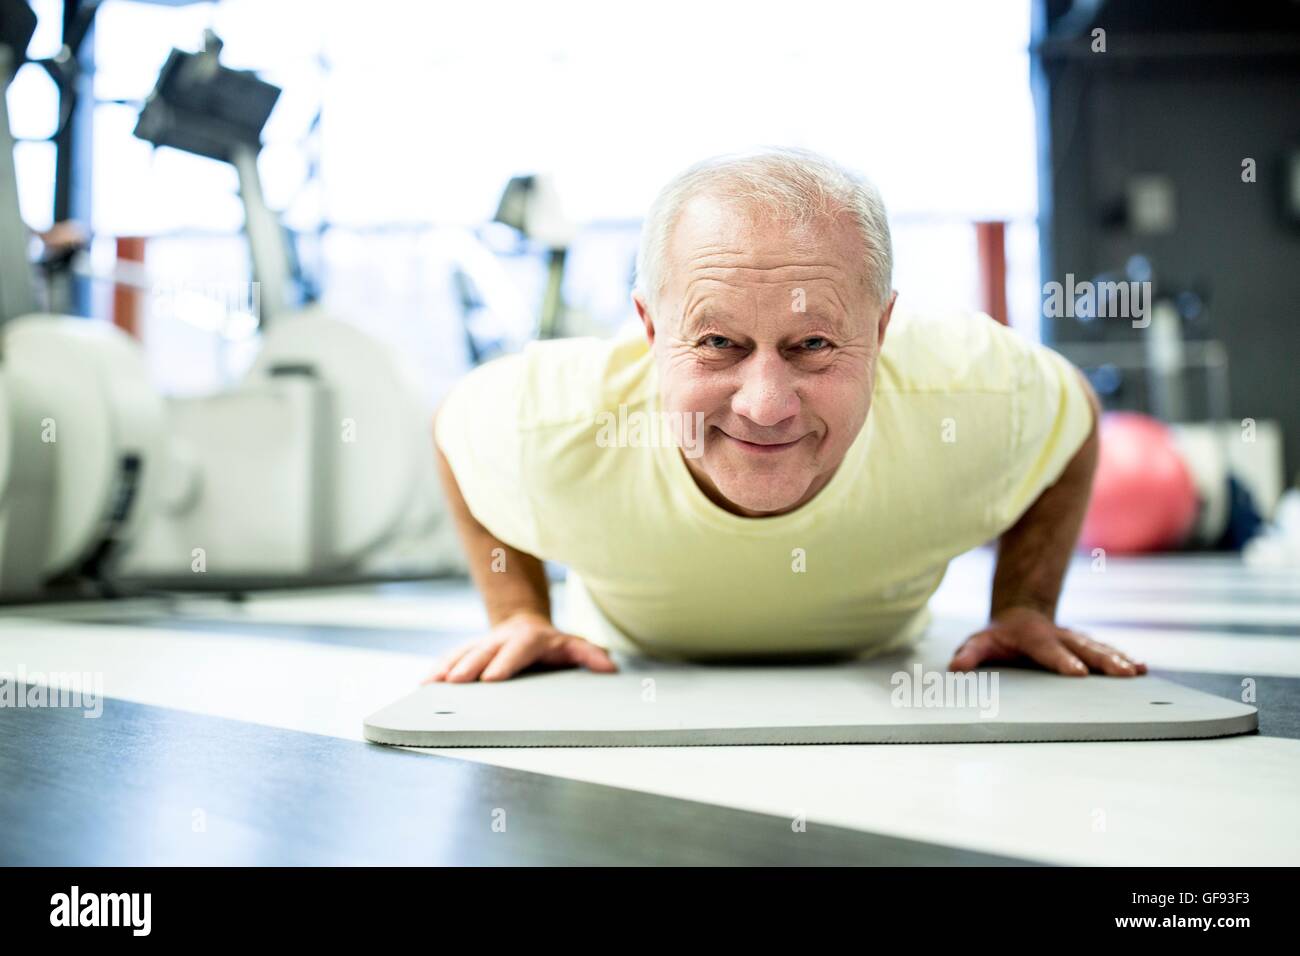 PROPERTY RELEASED. MODEL RELEASED. Portrait senior man exercising in gym and smiling. Stock Photo